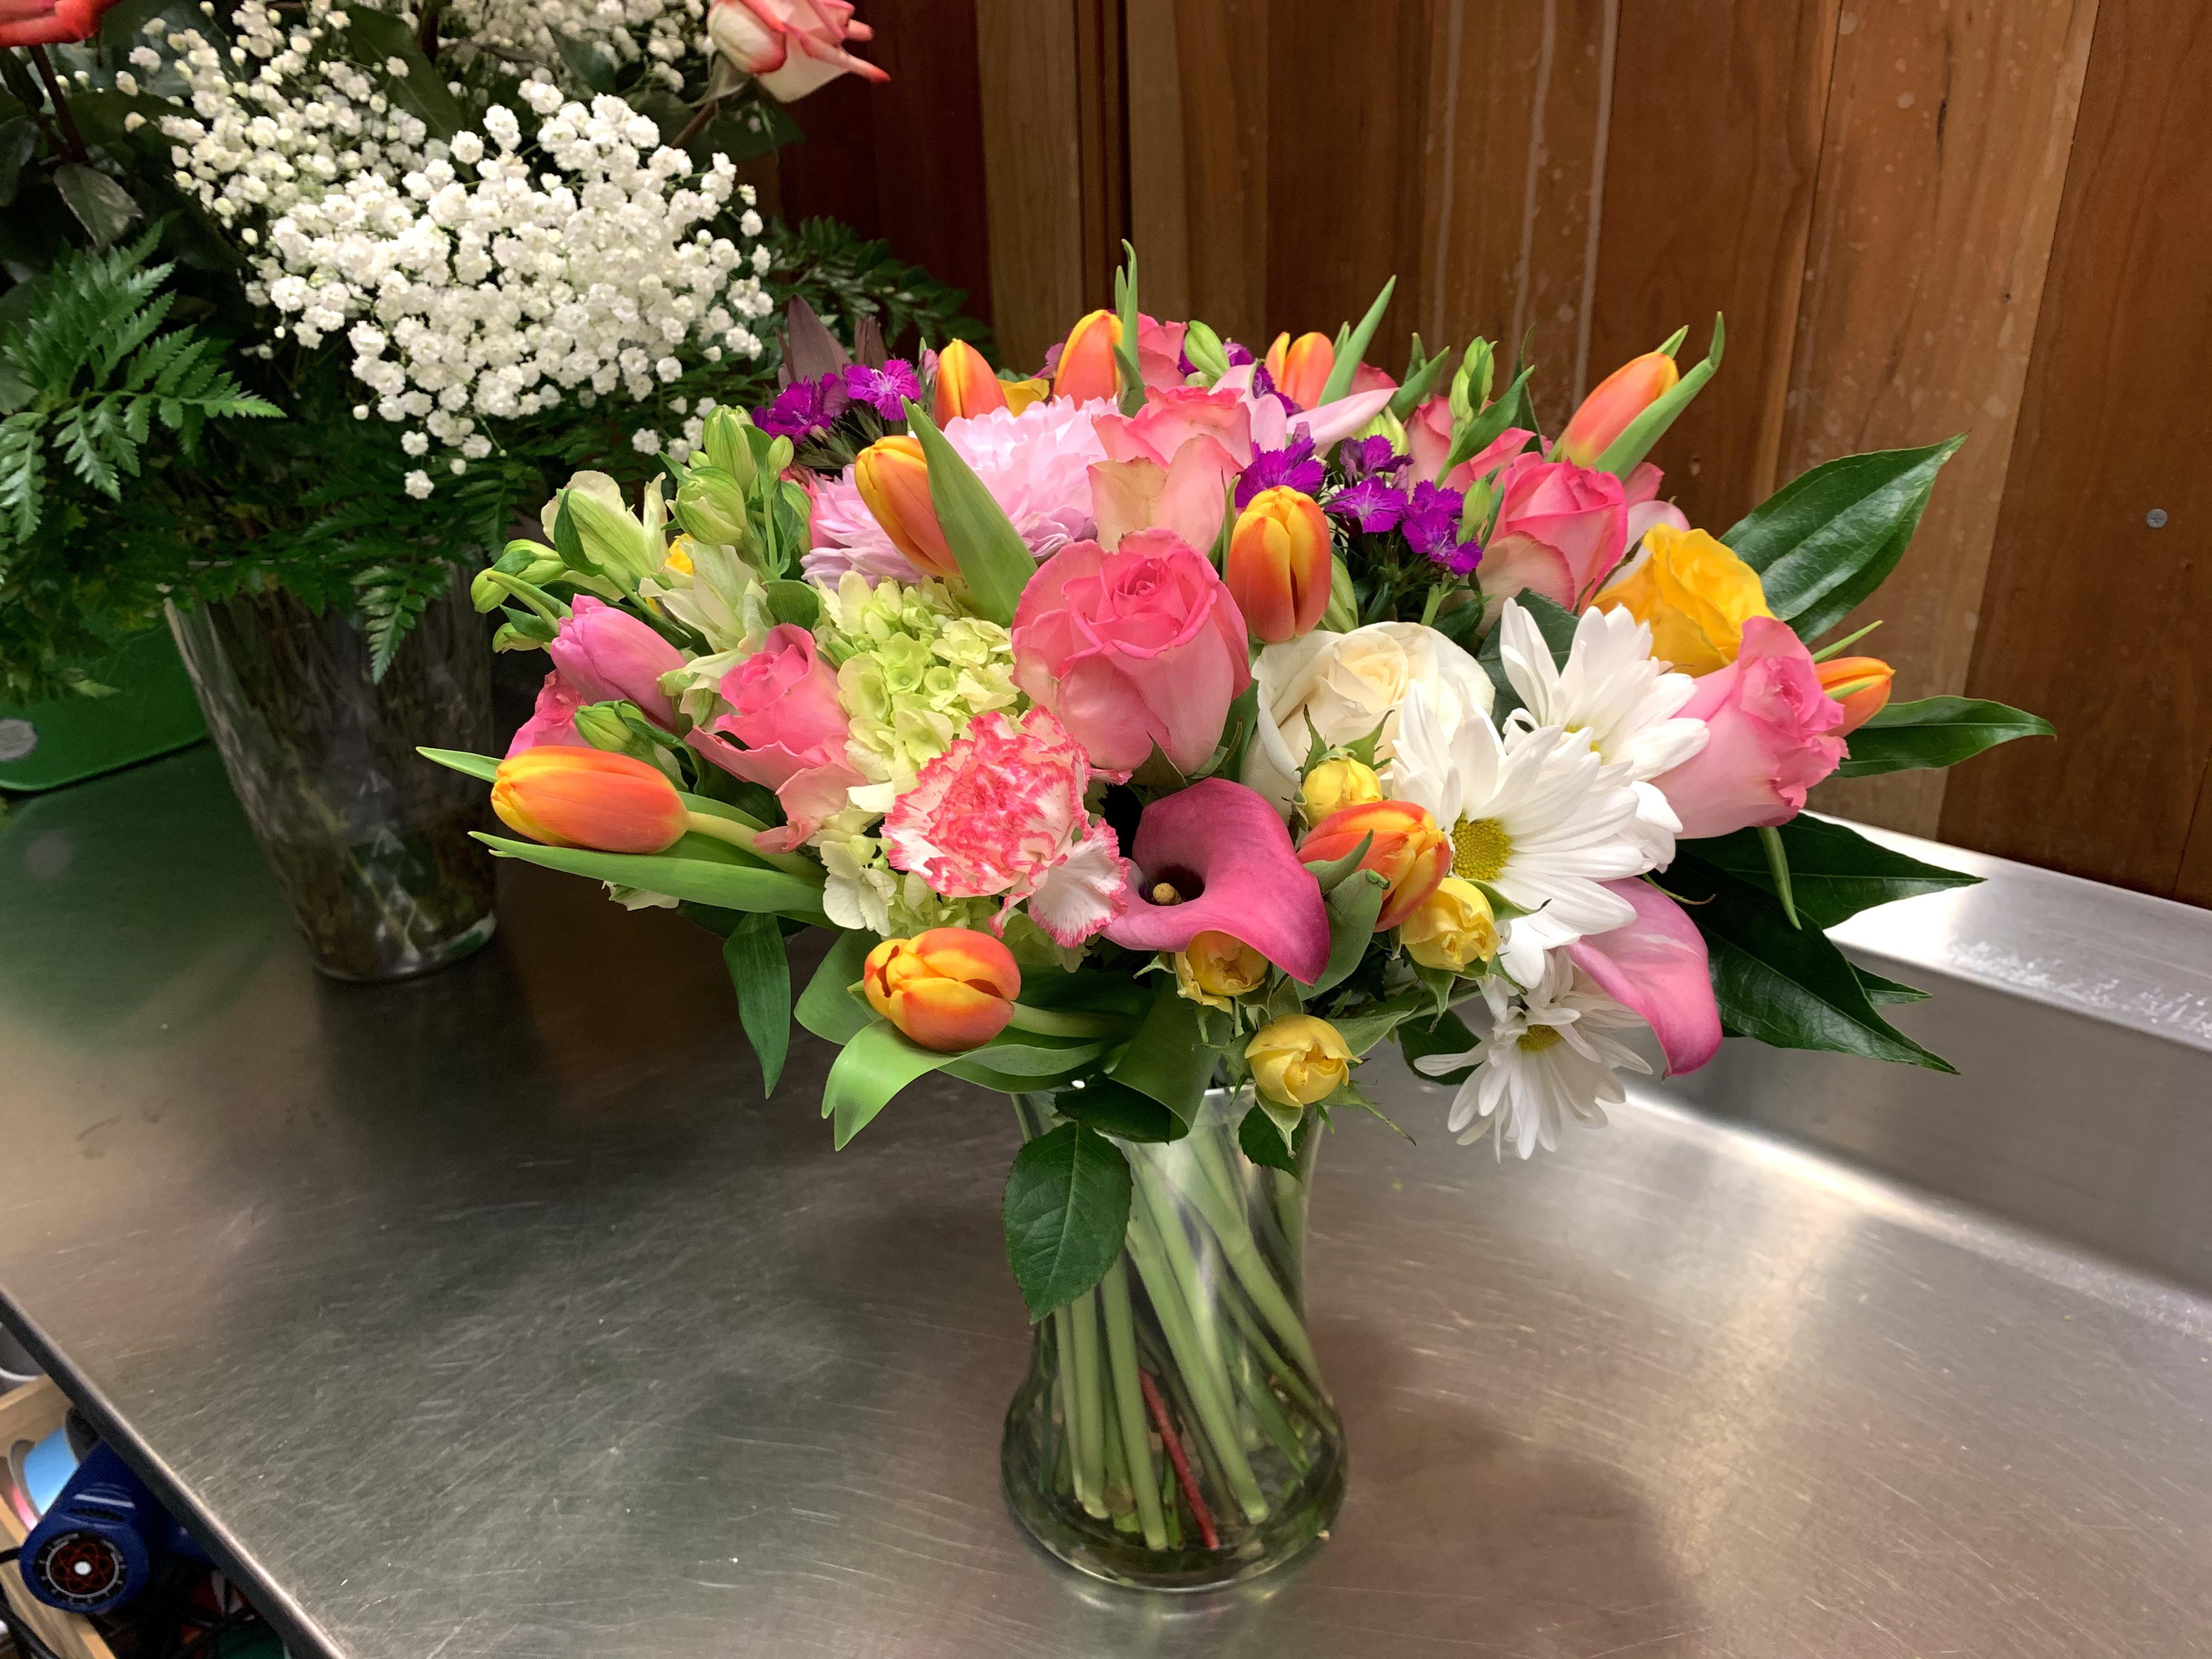 Customer wanted spring overload for his wife’s birthday. I think I ...